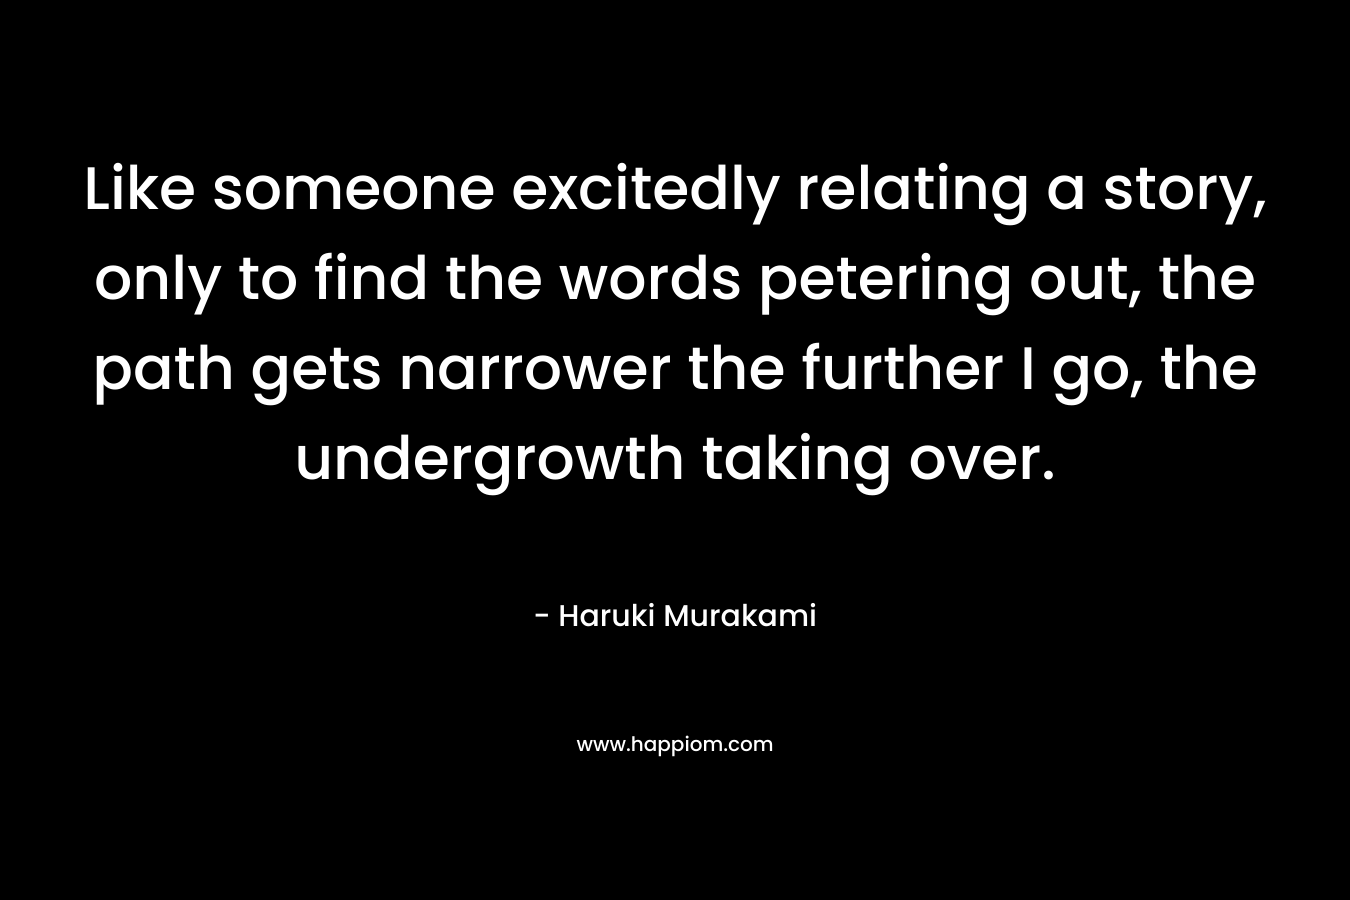 Like someone excitedly relating a story, only to find the words petering out, the path gets narrower the further I go, the undergrowth taking over. – Haruki Murakami